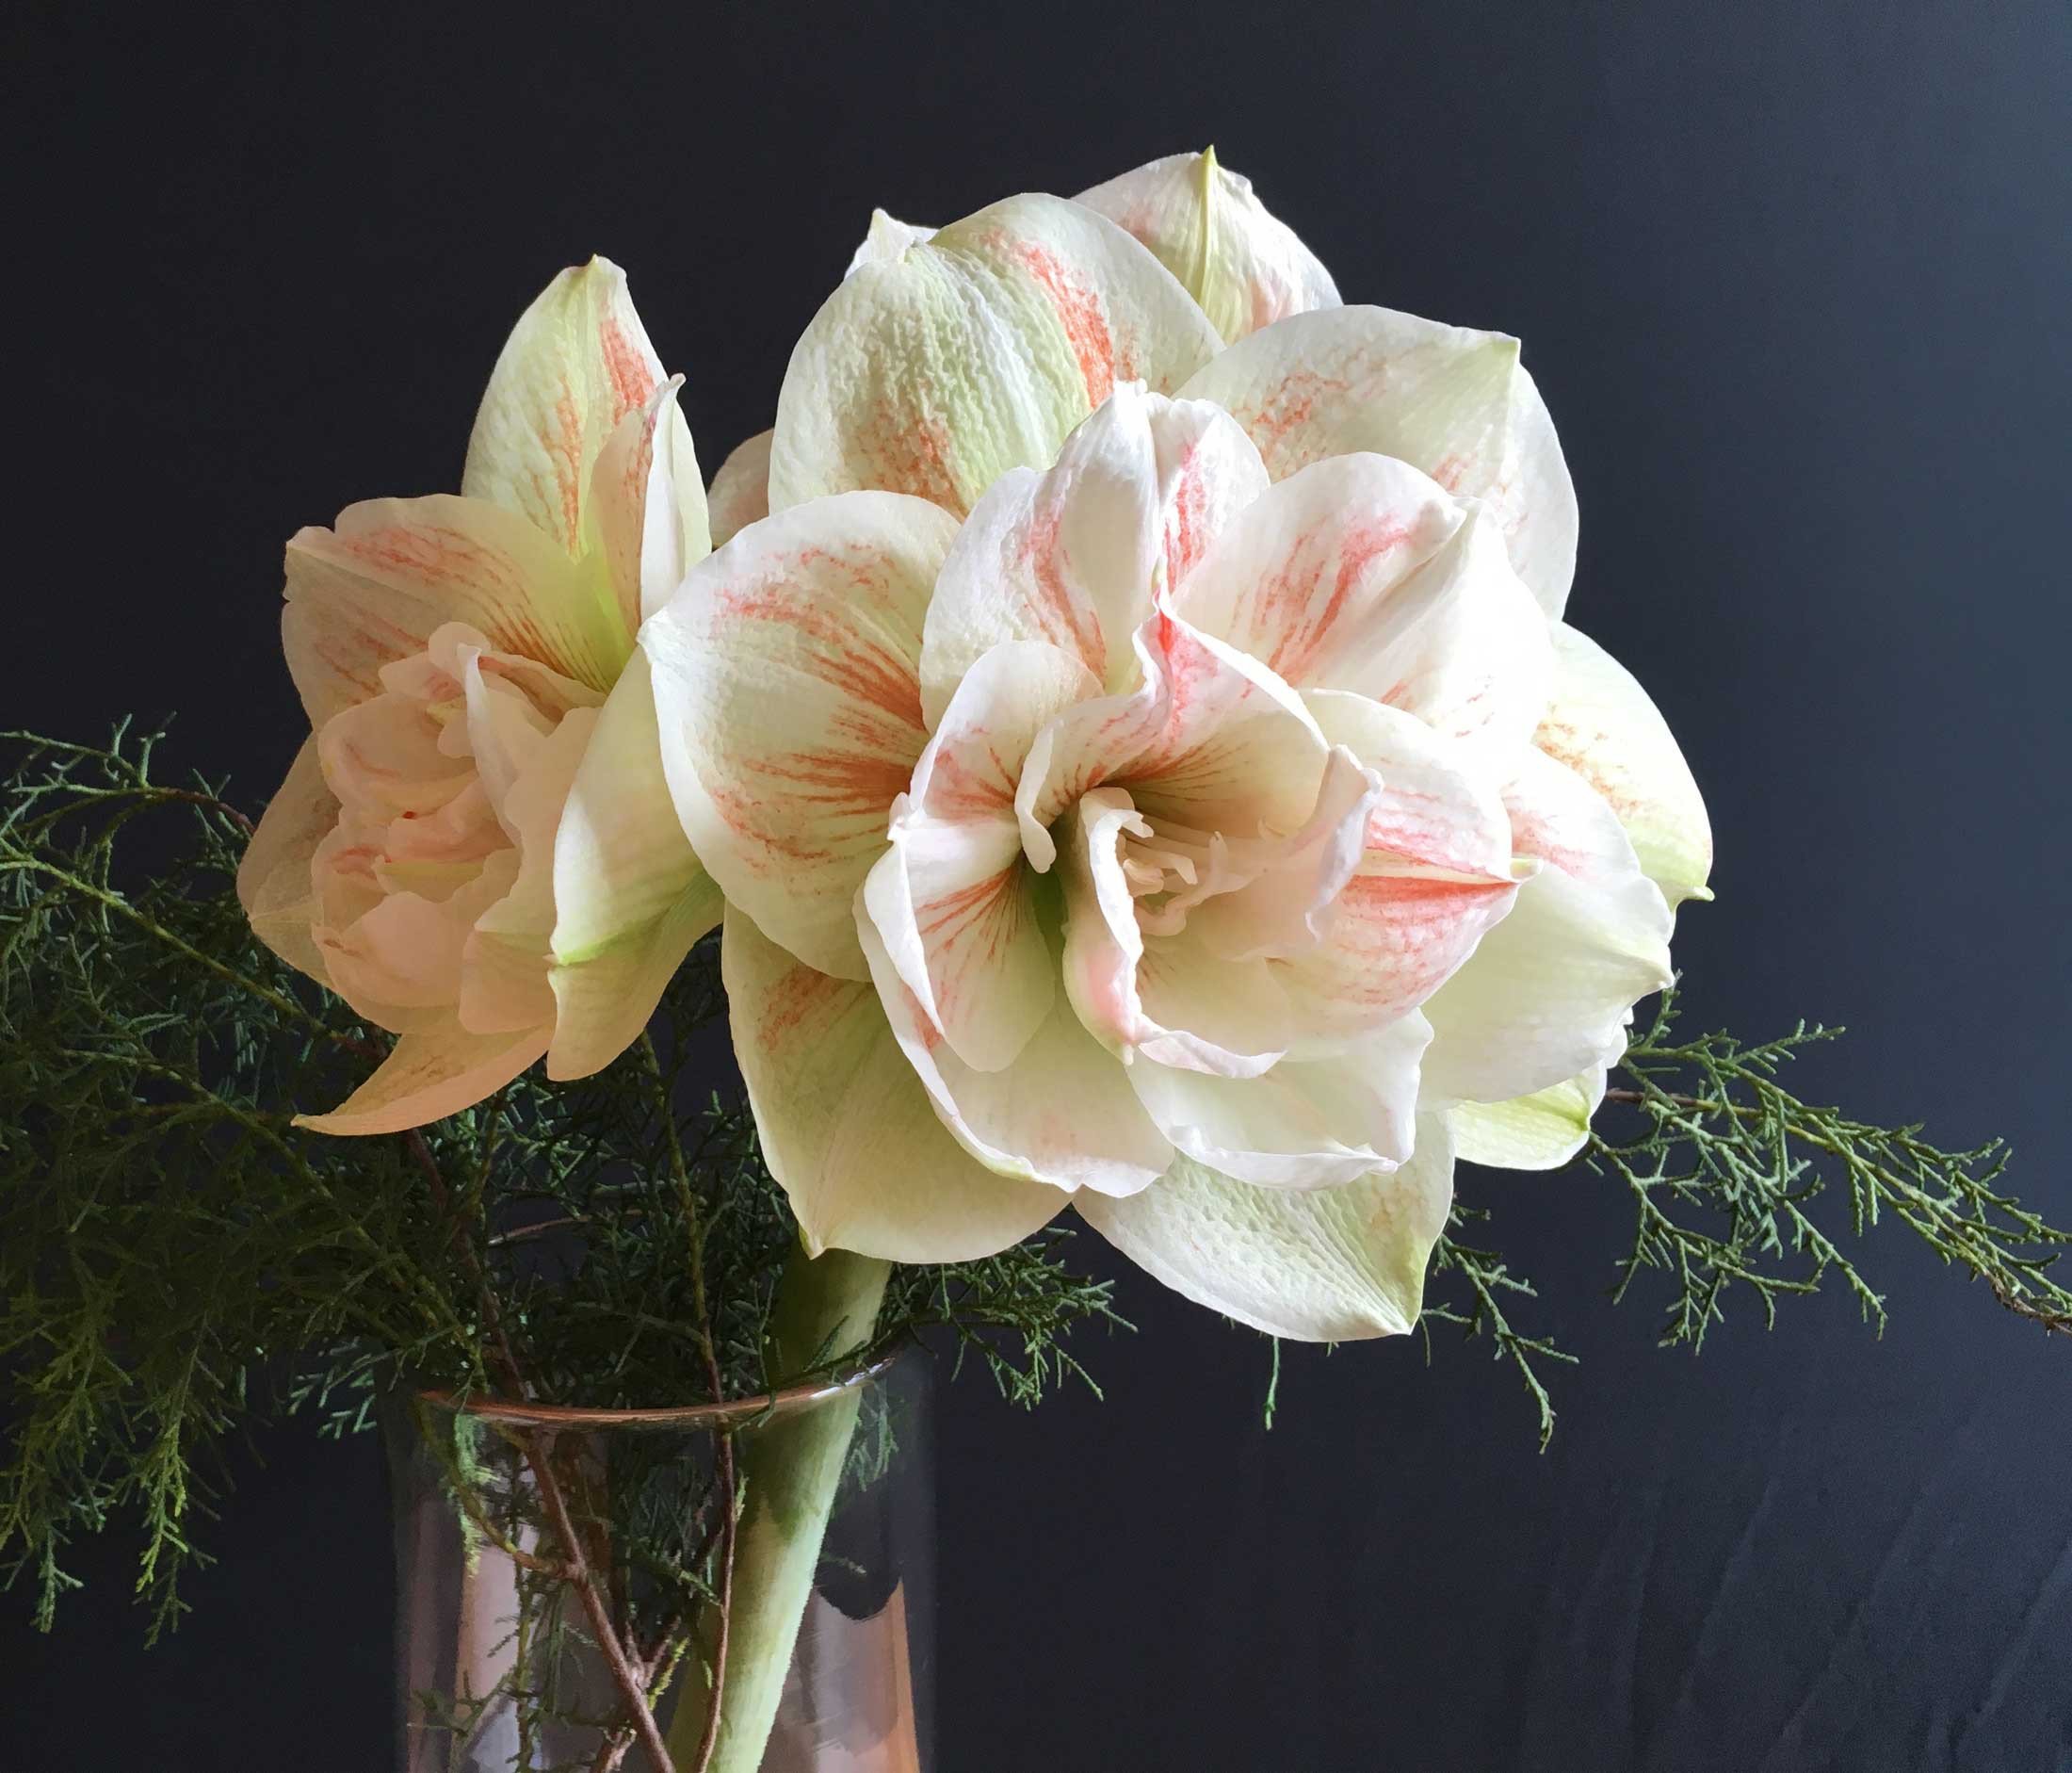 How To Use Amaryllis As Cut Flowers